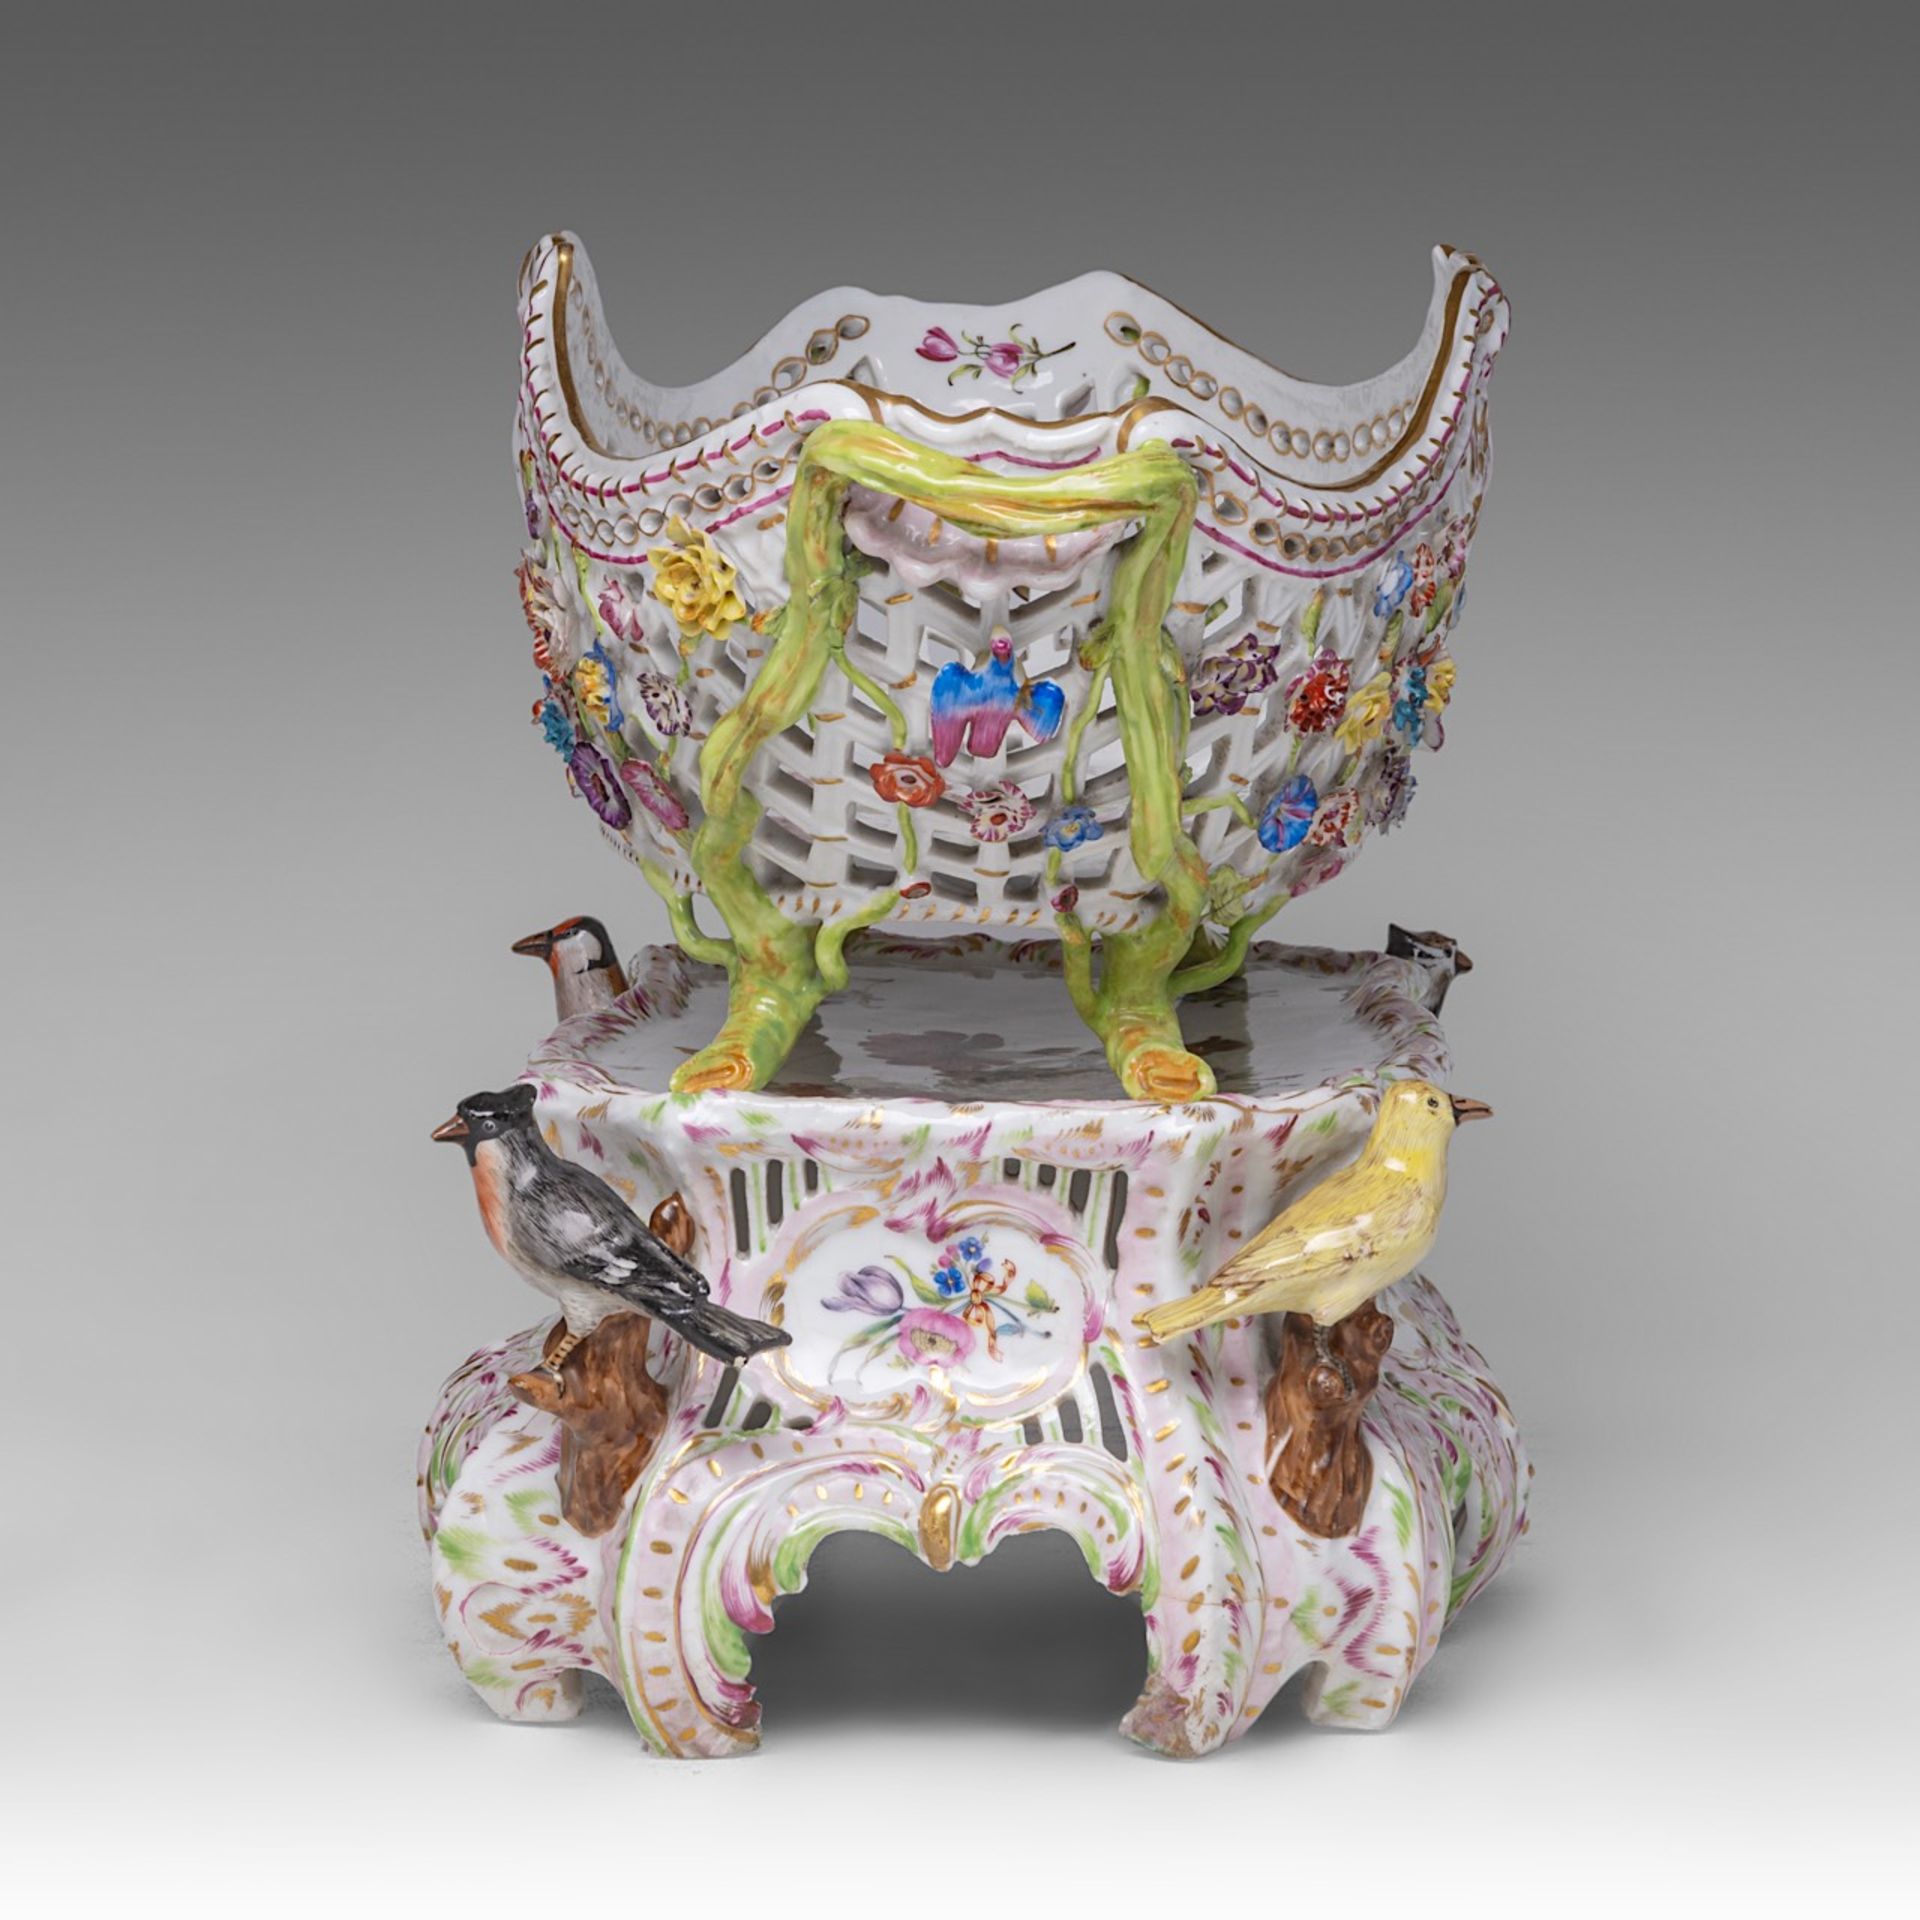 A polychrome Saxony porcelain basket on stand, decorated with modelled birds and flowers, H 33 - W 4 - Image 3 of 12